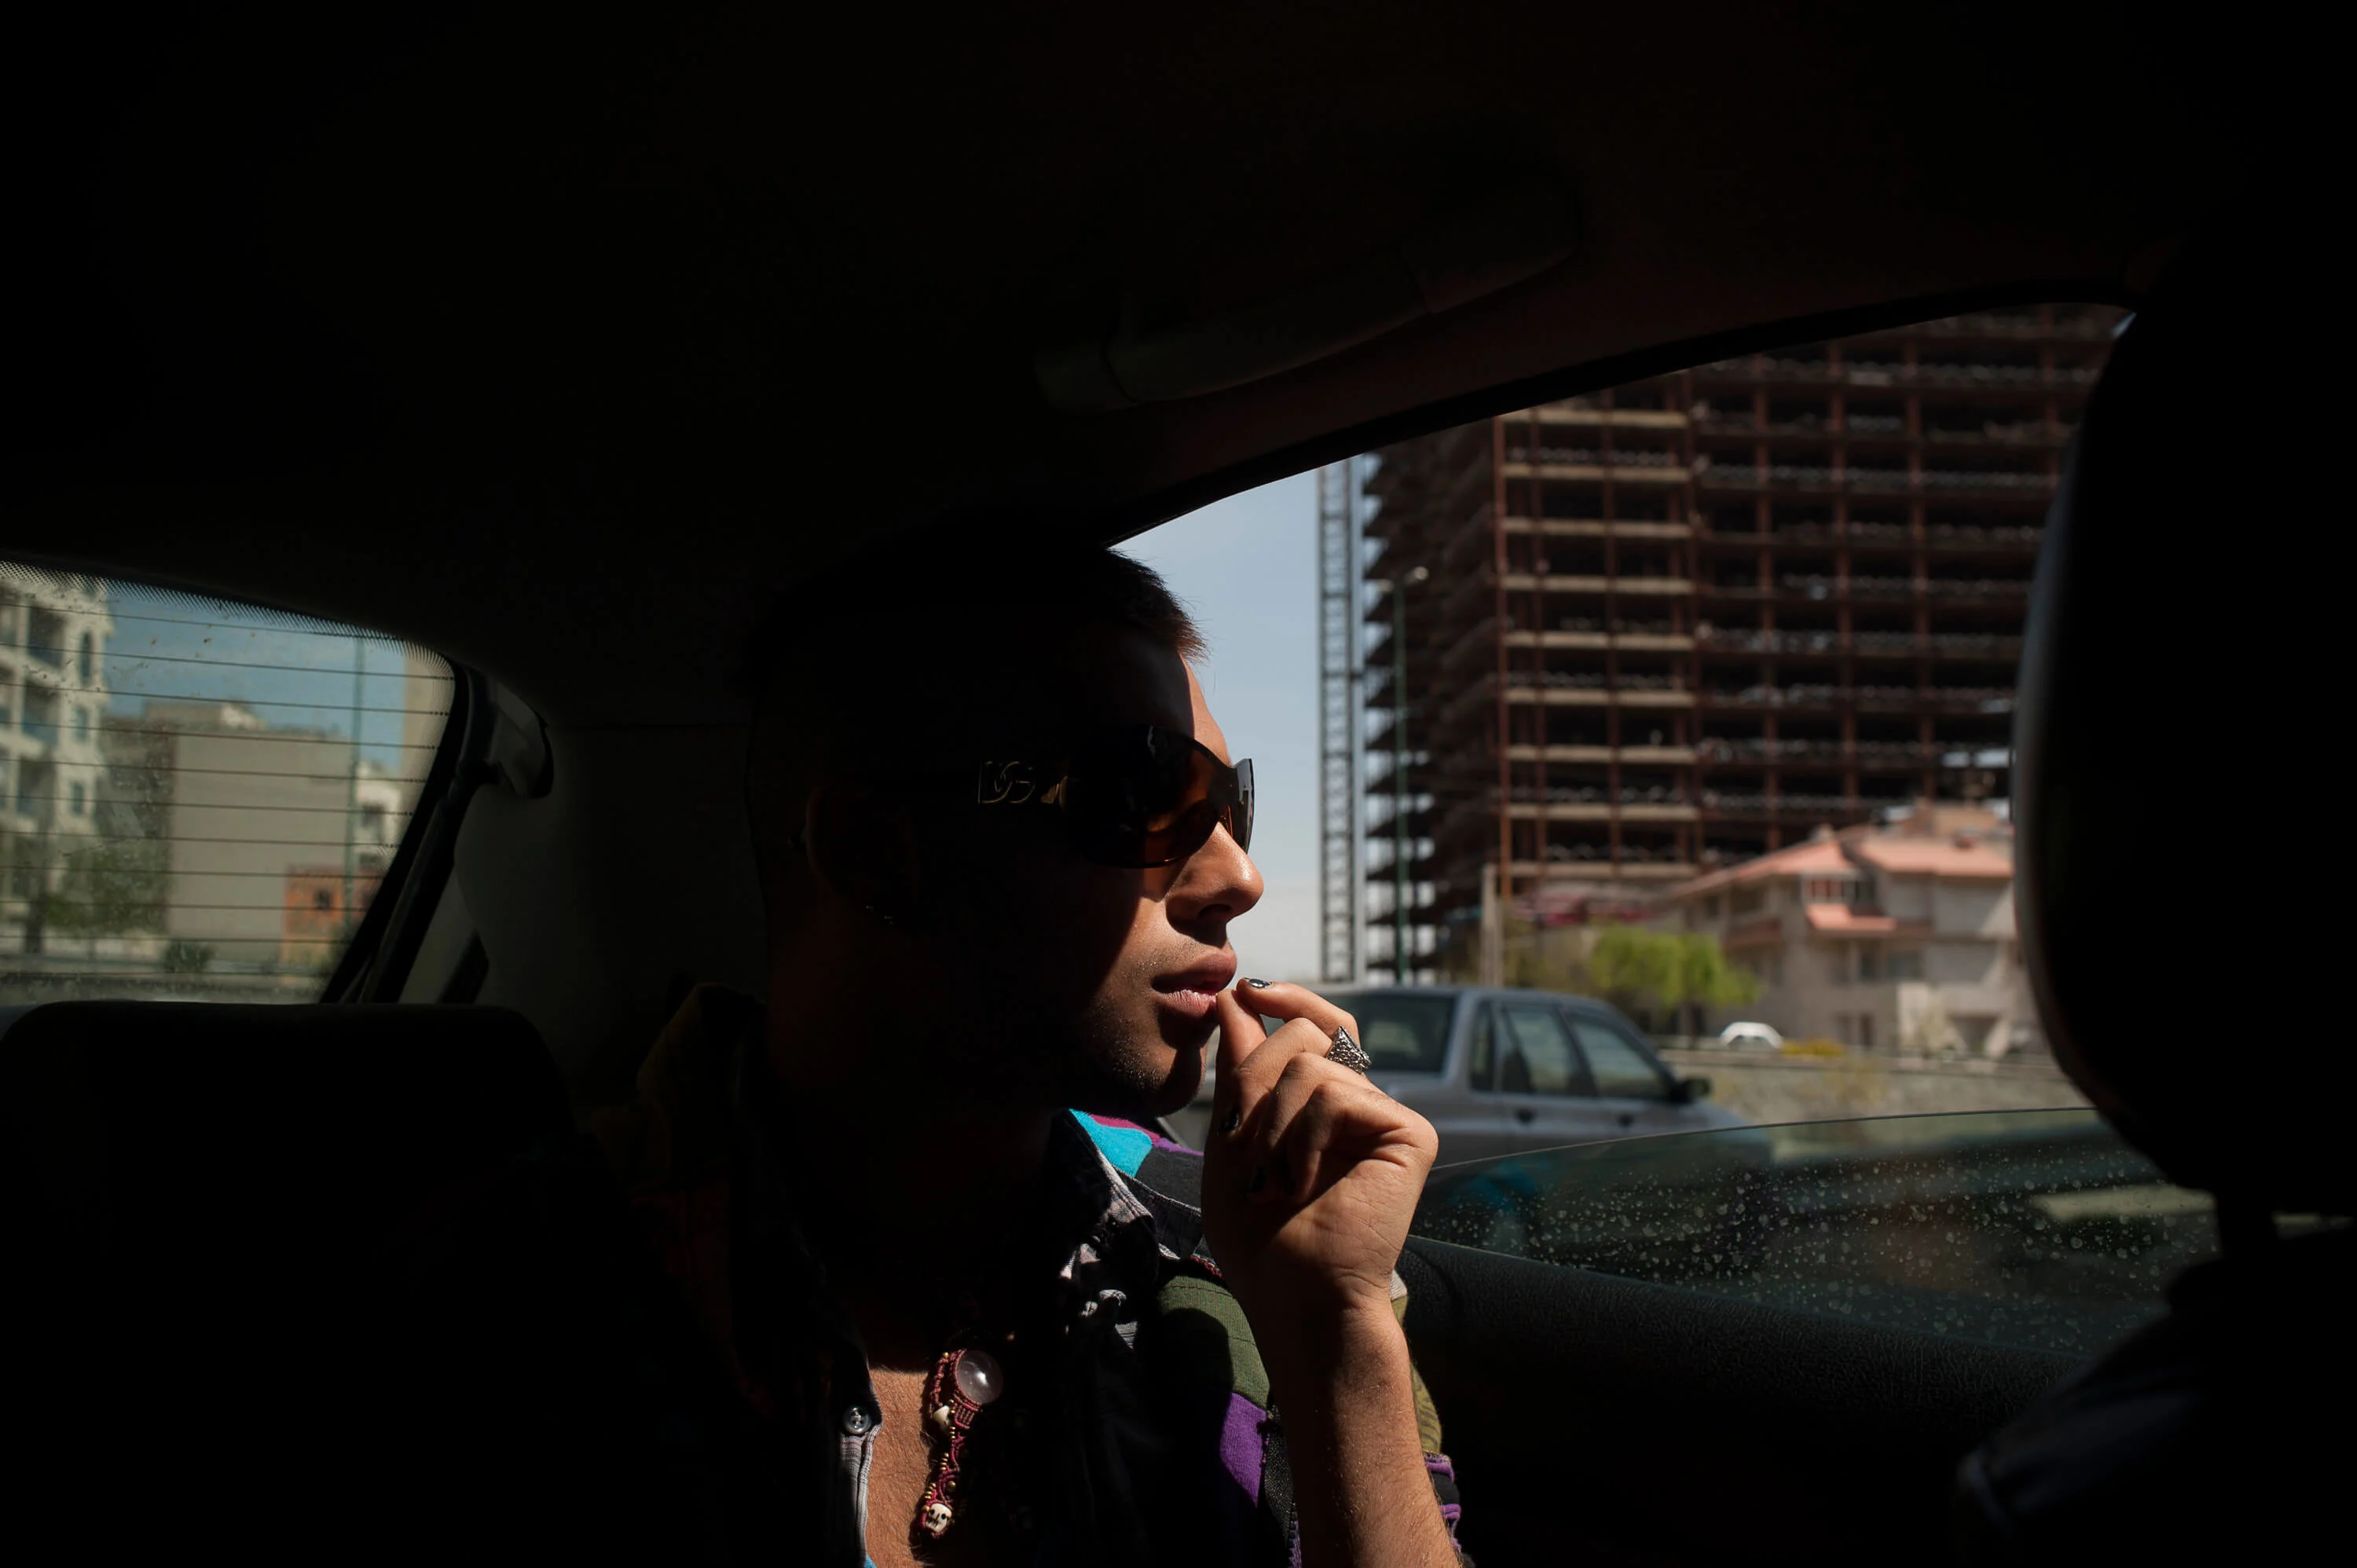 Amir (19) gazes out of the window on a ride along with his family and friends to Eram Wonderland outside of Tehran.